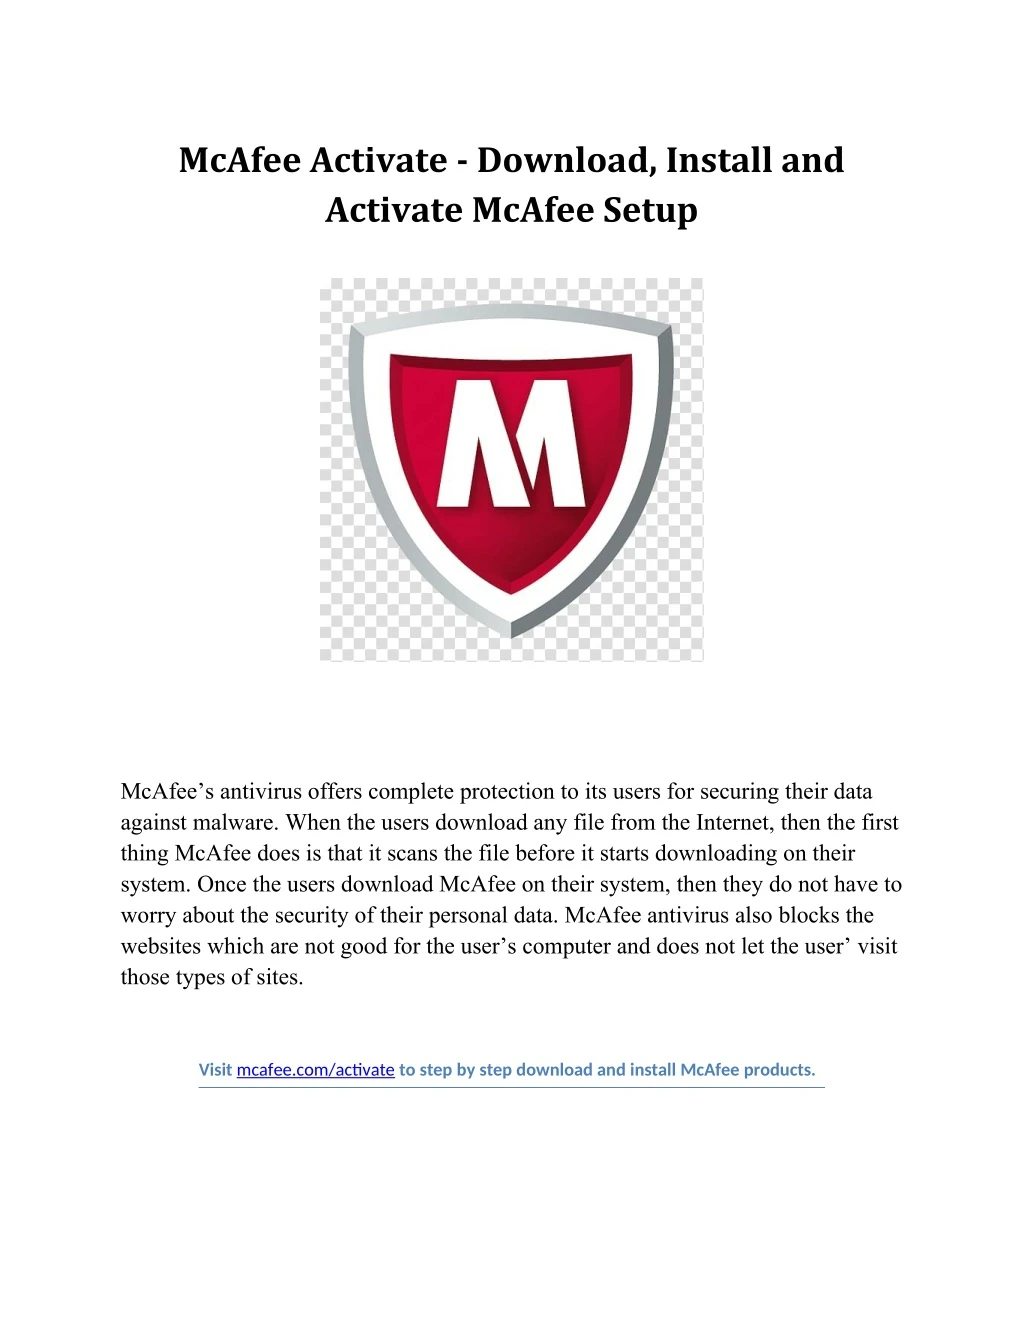 mcafee activate download install and activate